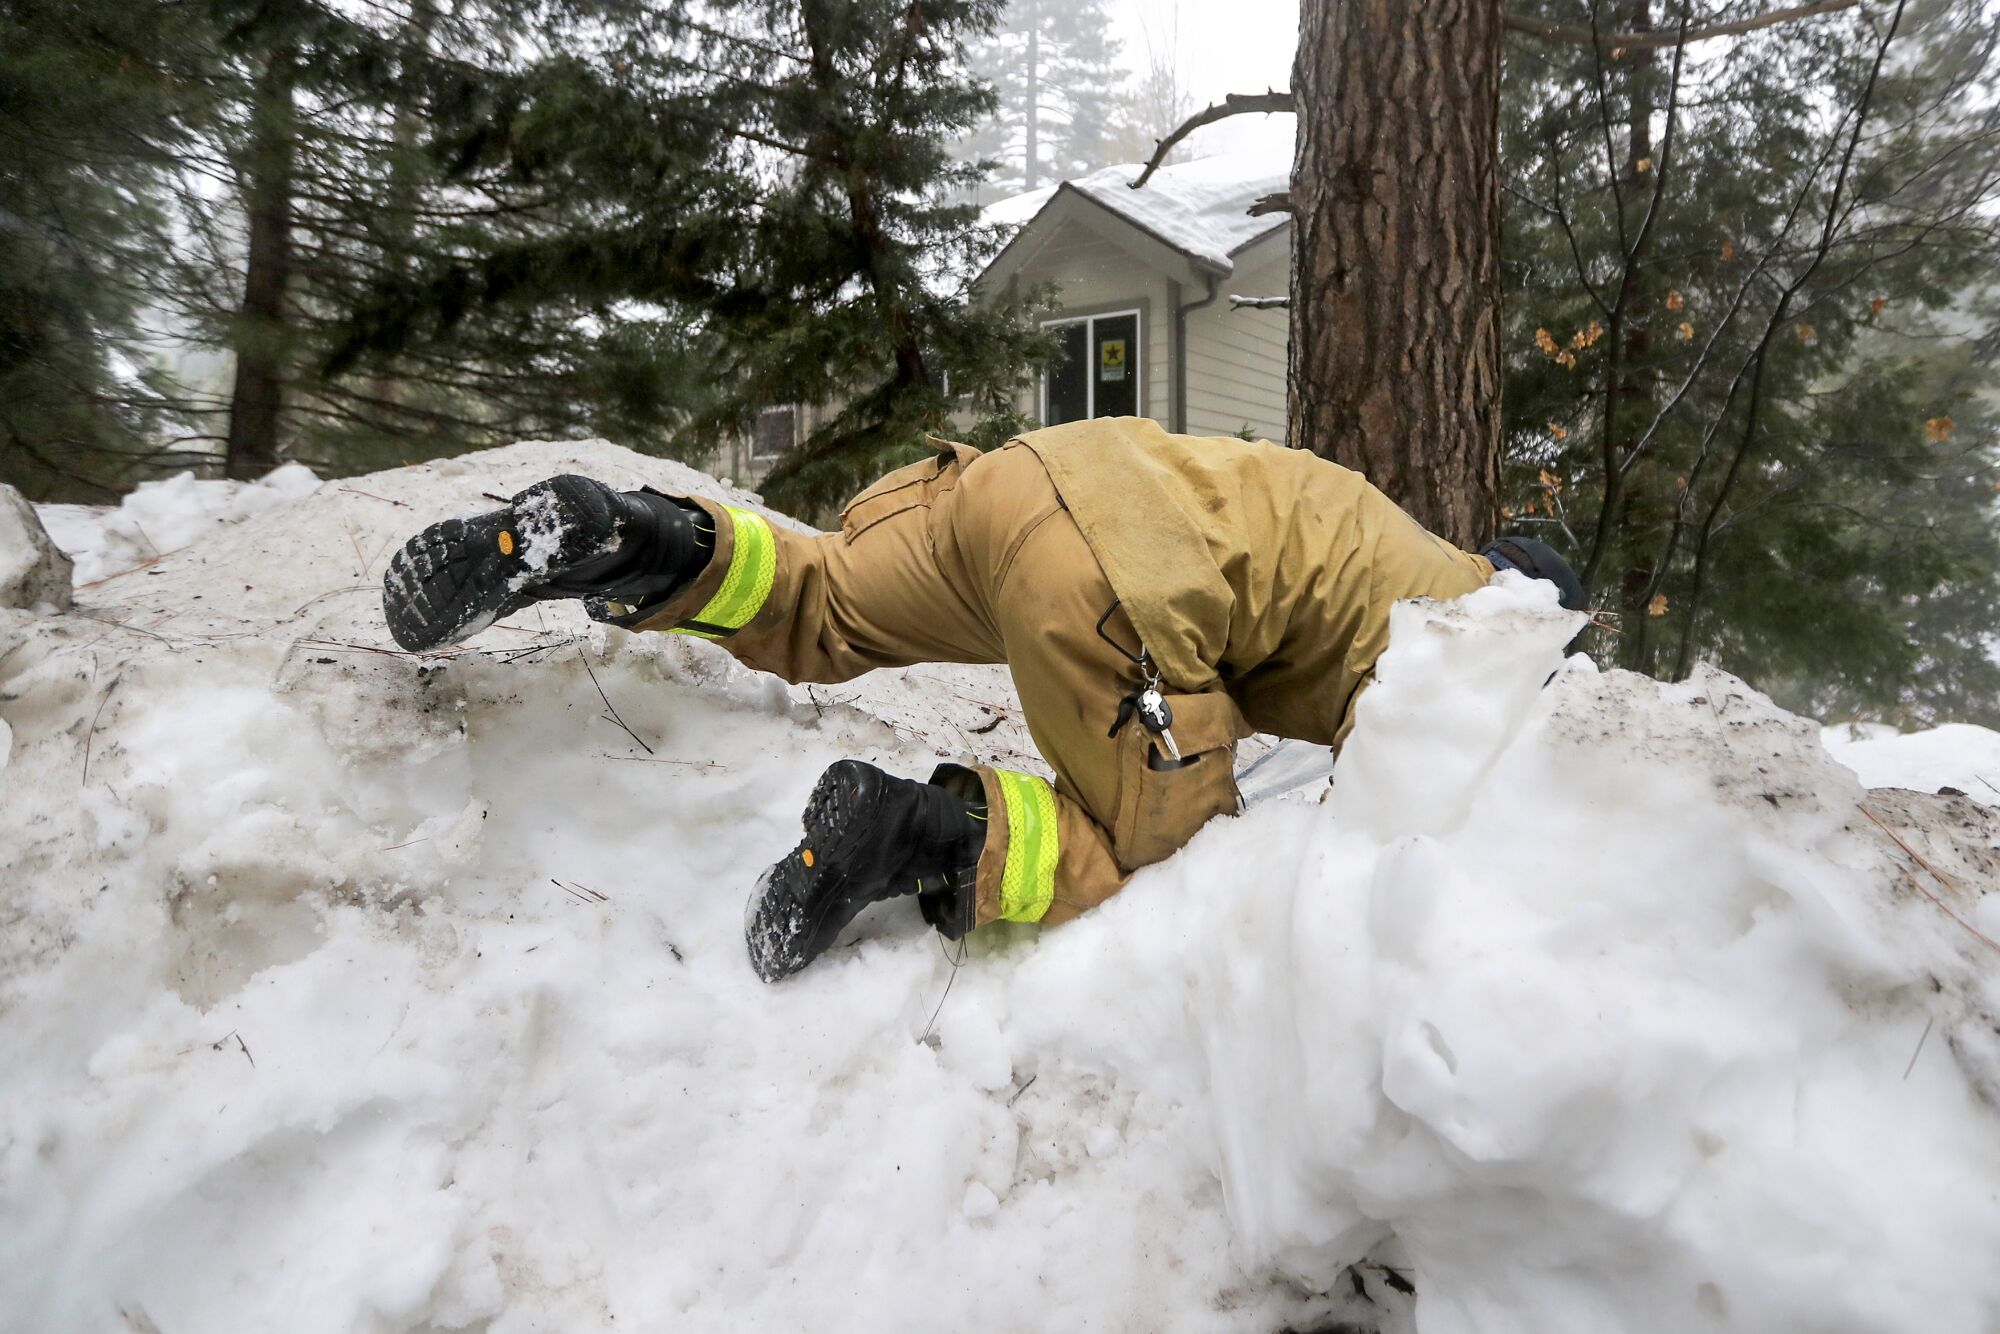 A person in a tan firefighter uniform climbs over a steep snow berm, their head disappearing behind a pile